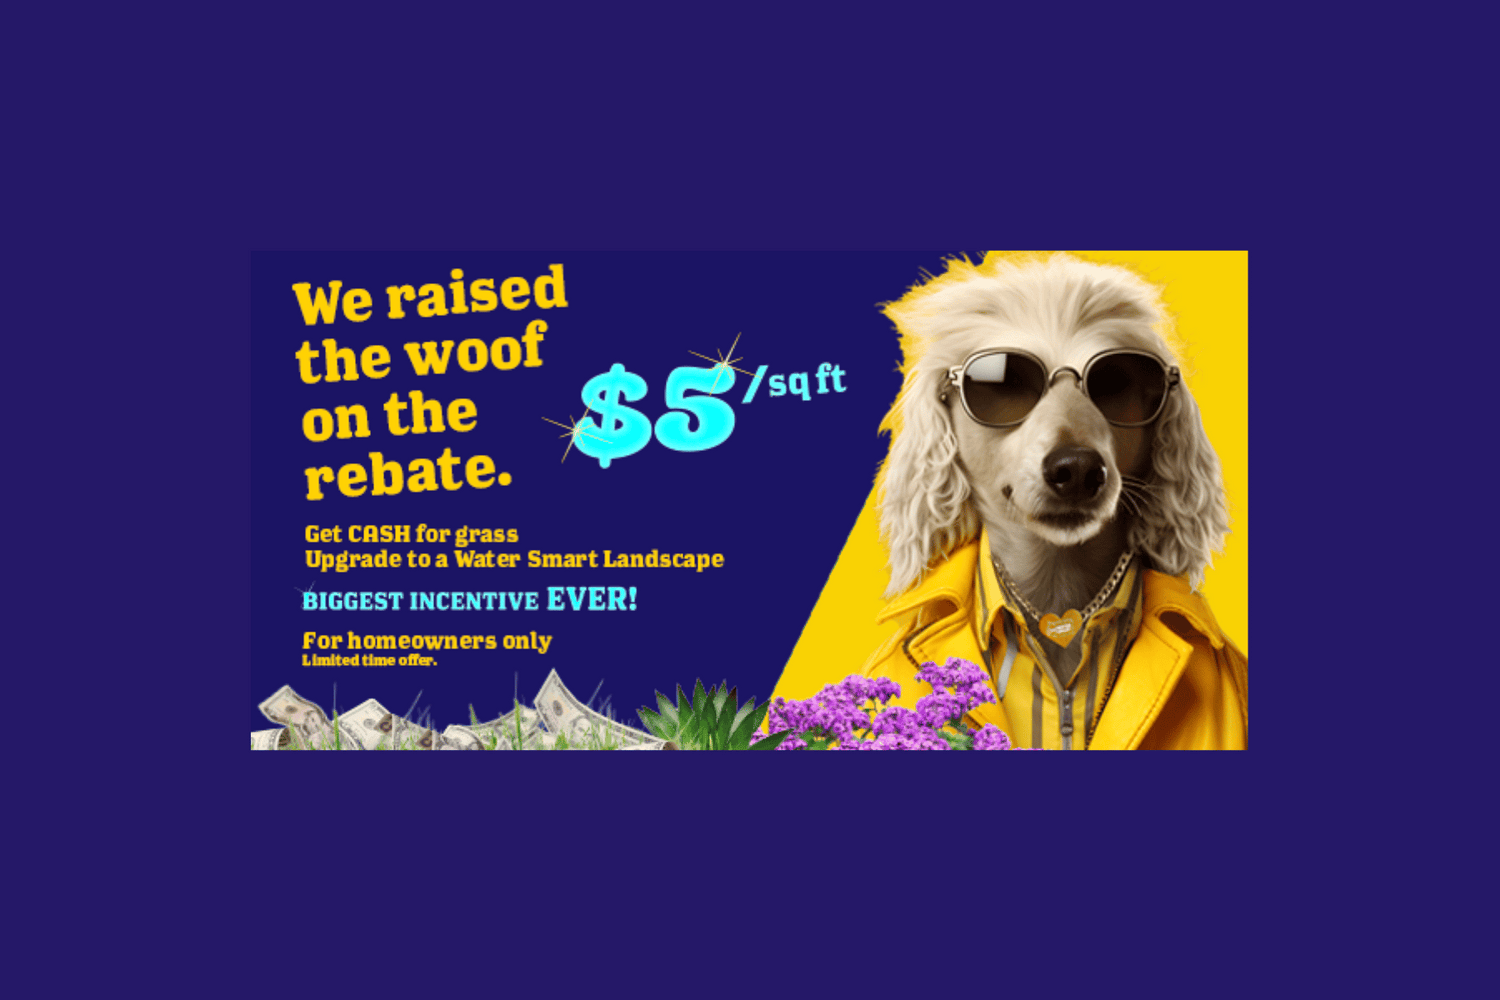 Southern Nevada water authority rebate ad with dog